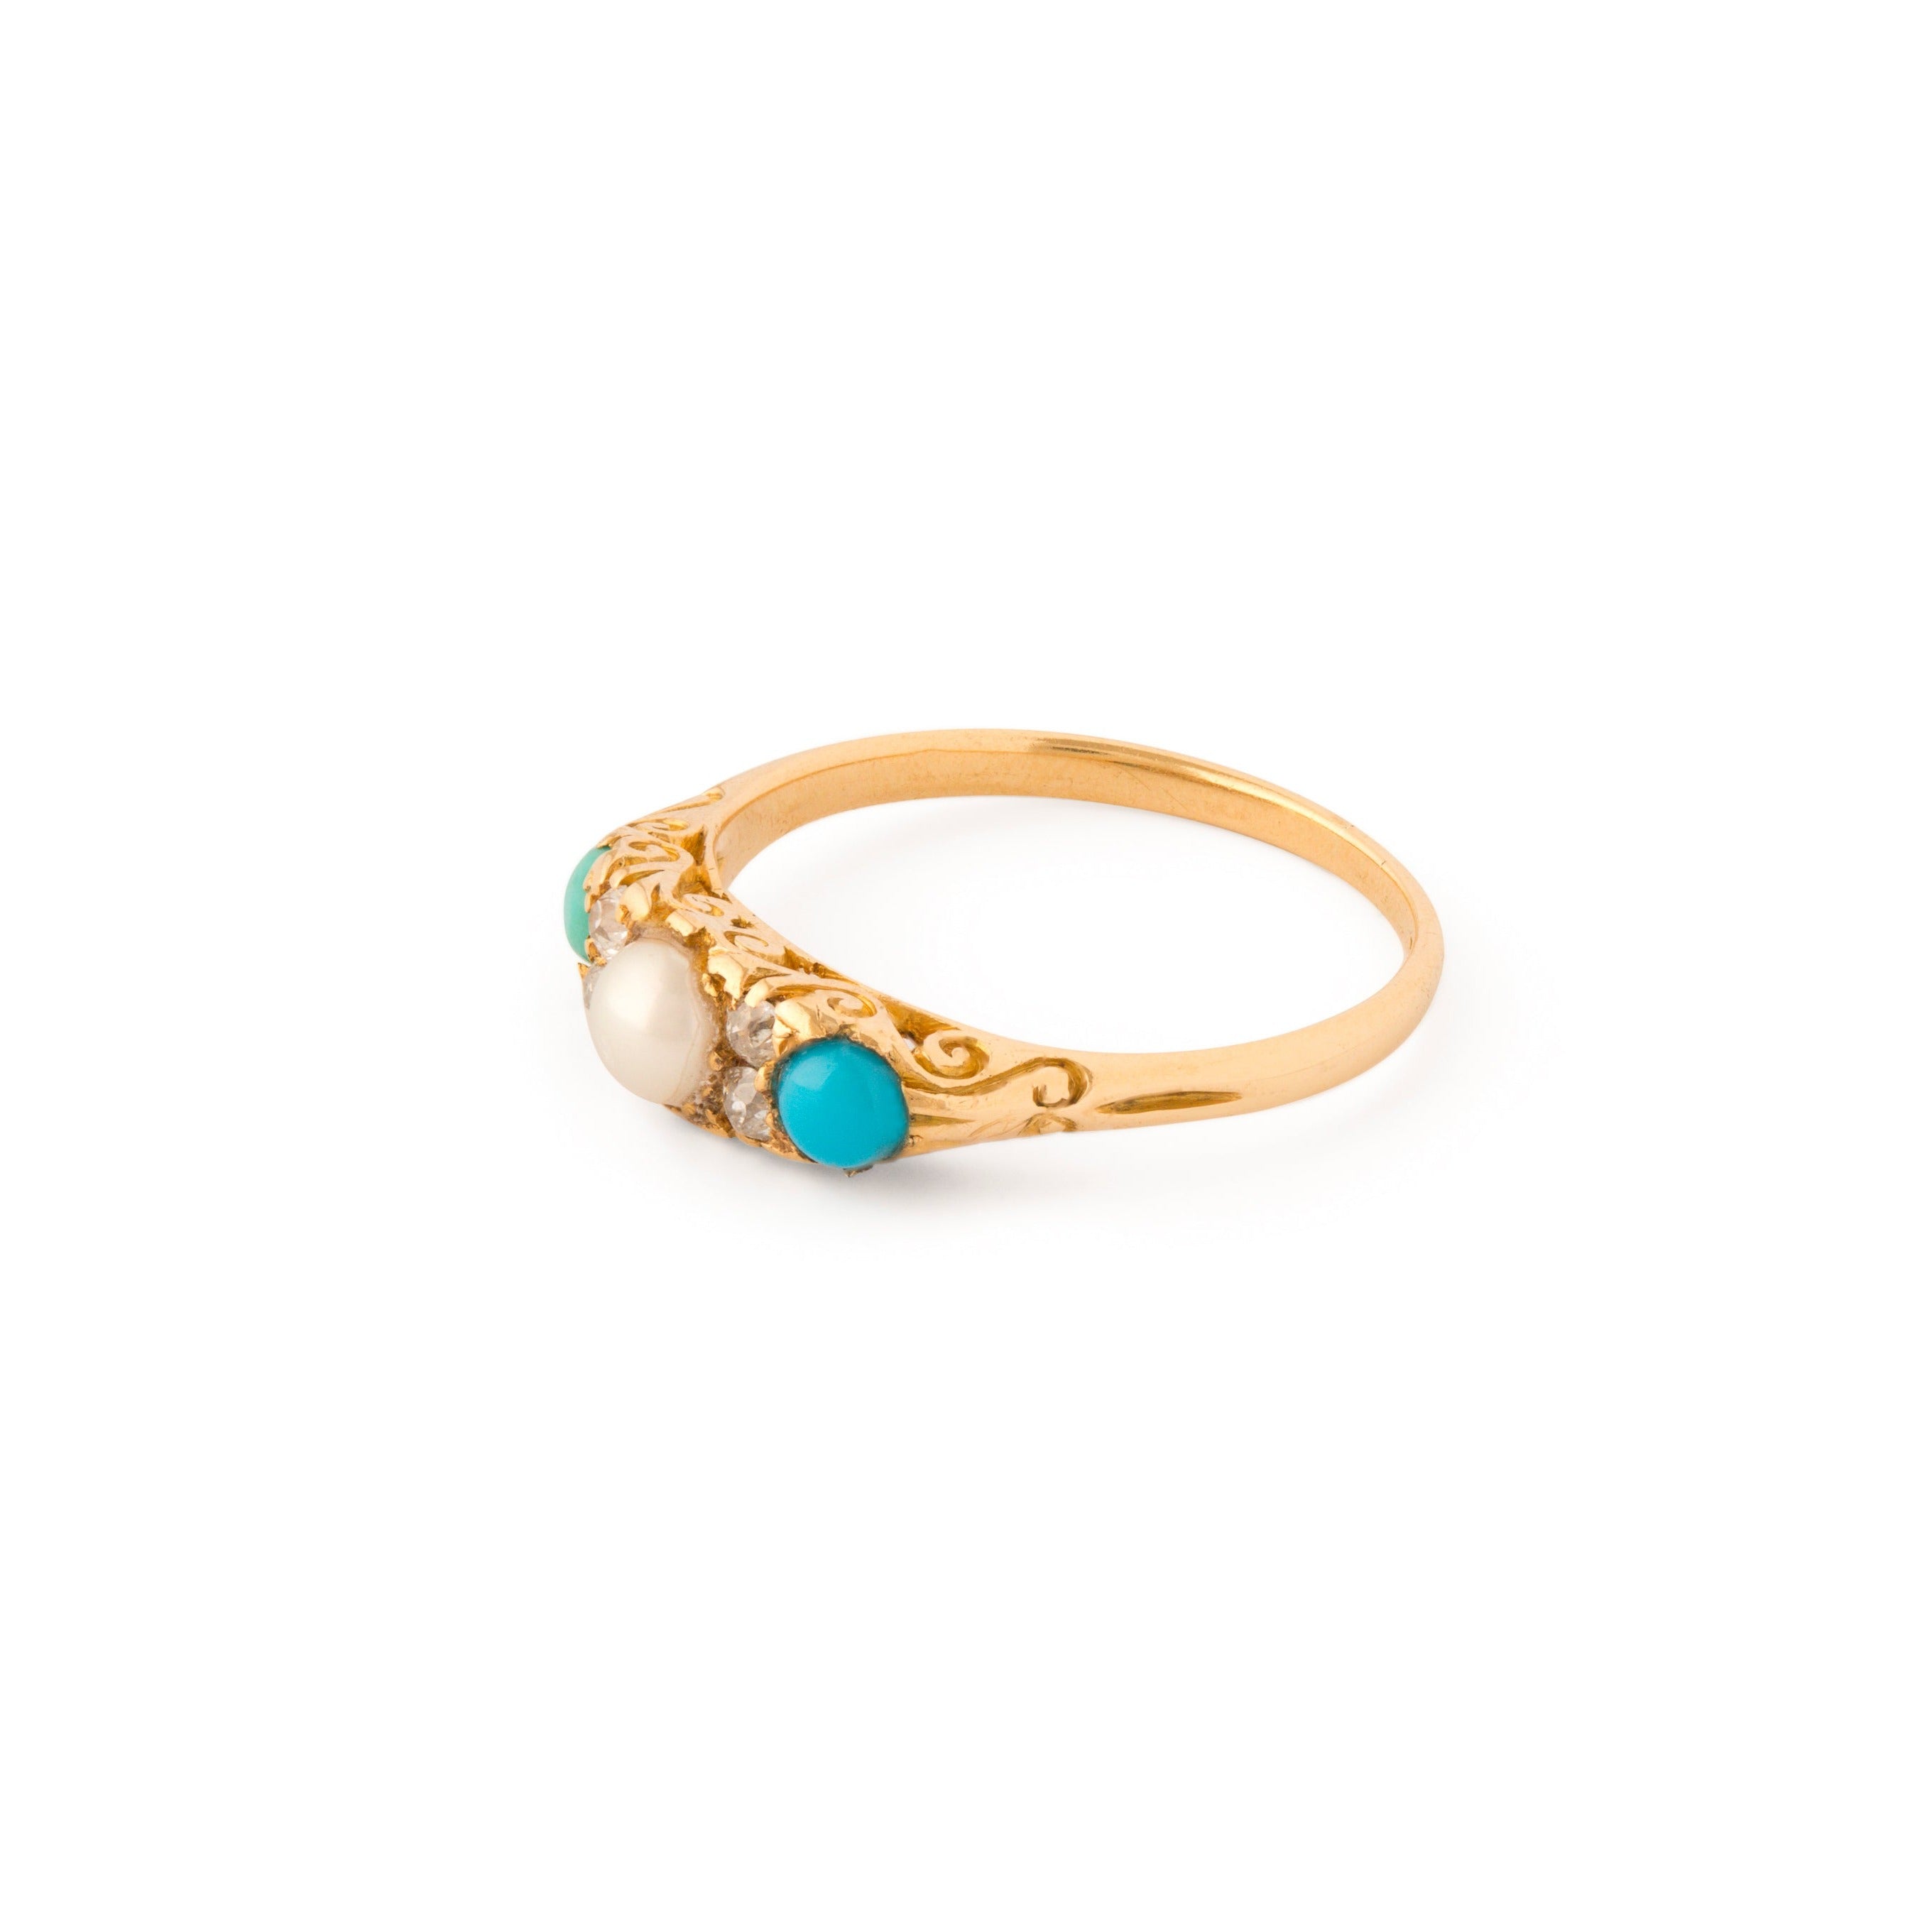 Victorian Pearl, Turquoise, and Diamond, 18k Gold Ring